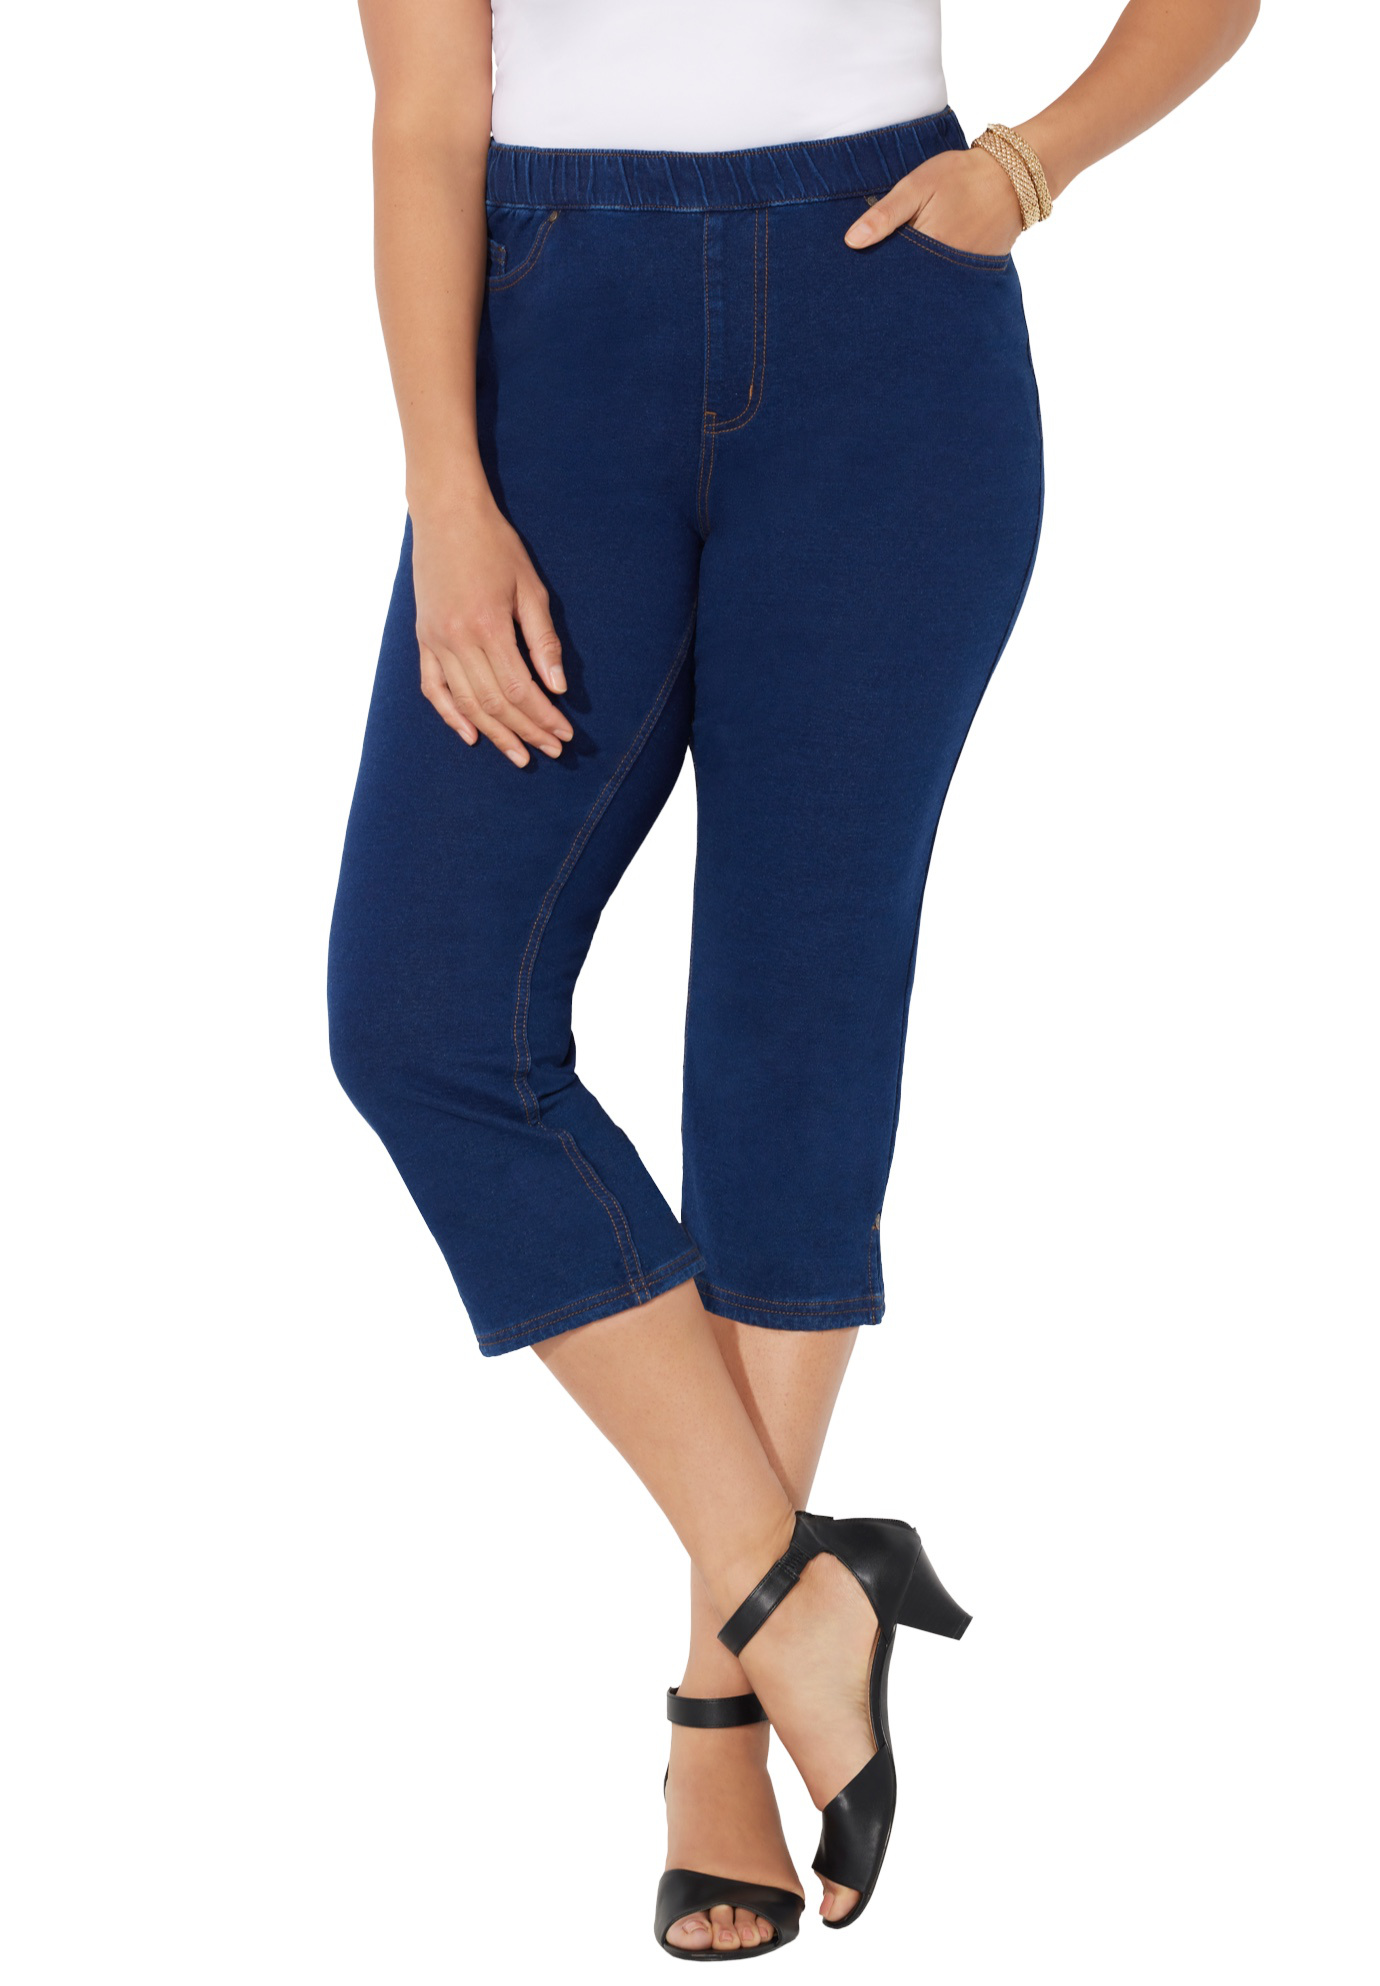 Catherines Women's Plus Size The Knit Jean Capri (With Pockets) - image 1 of 4